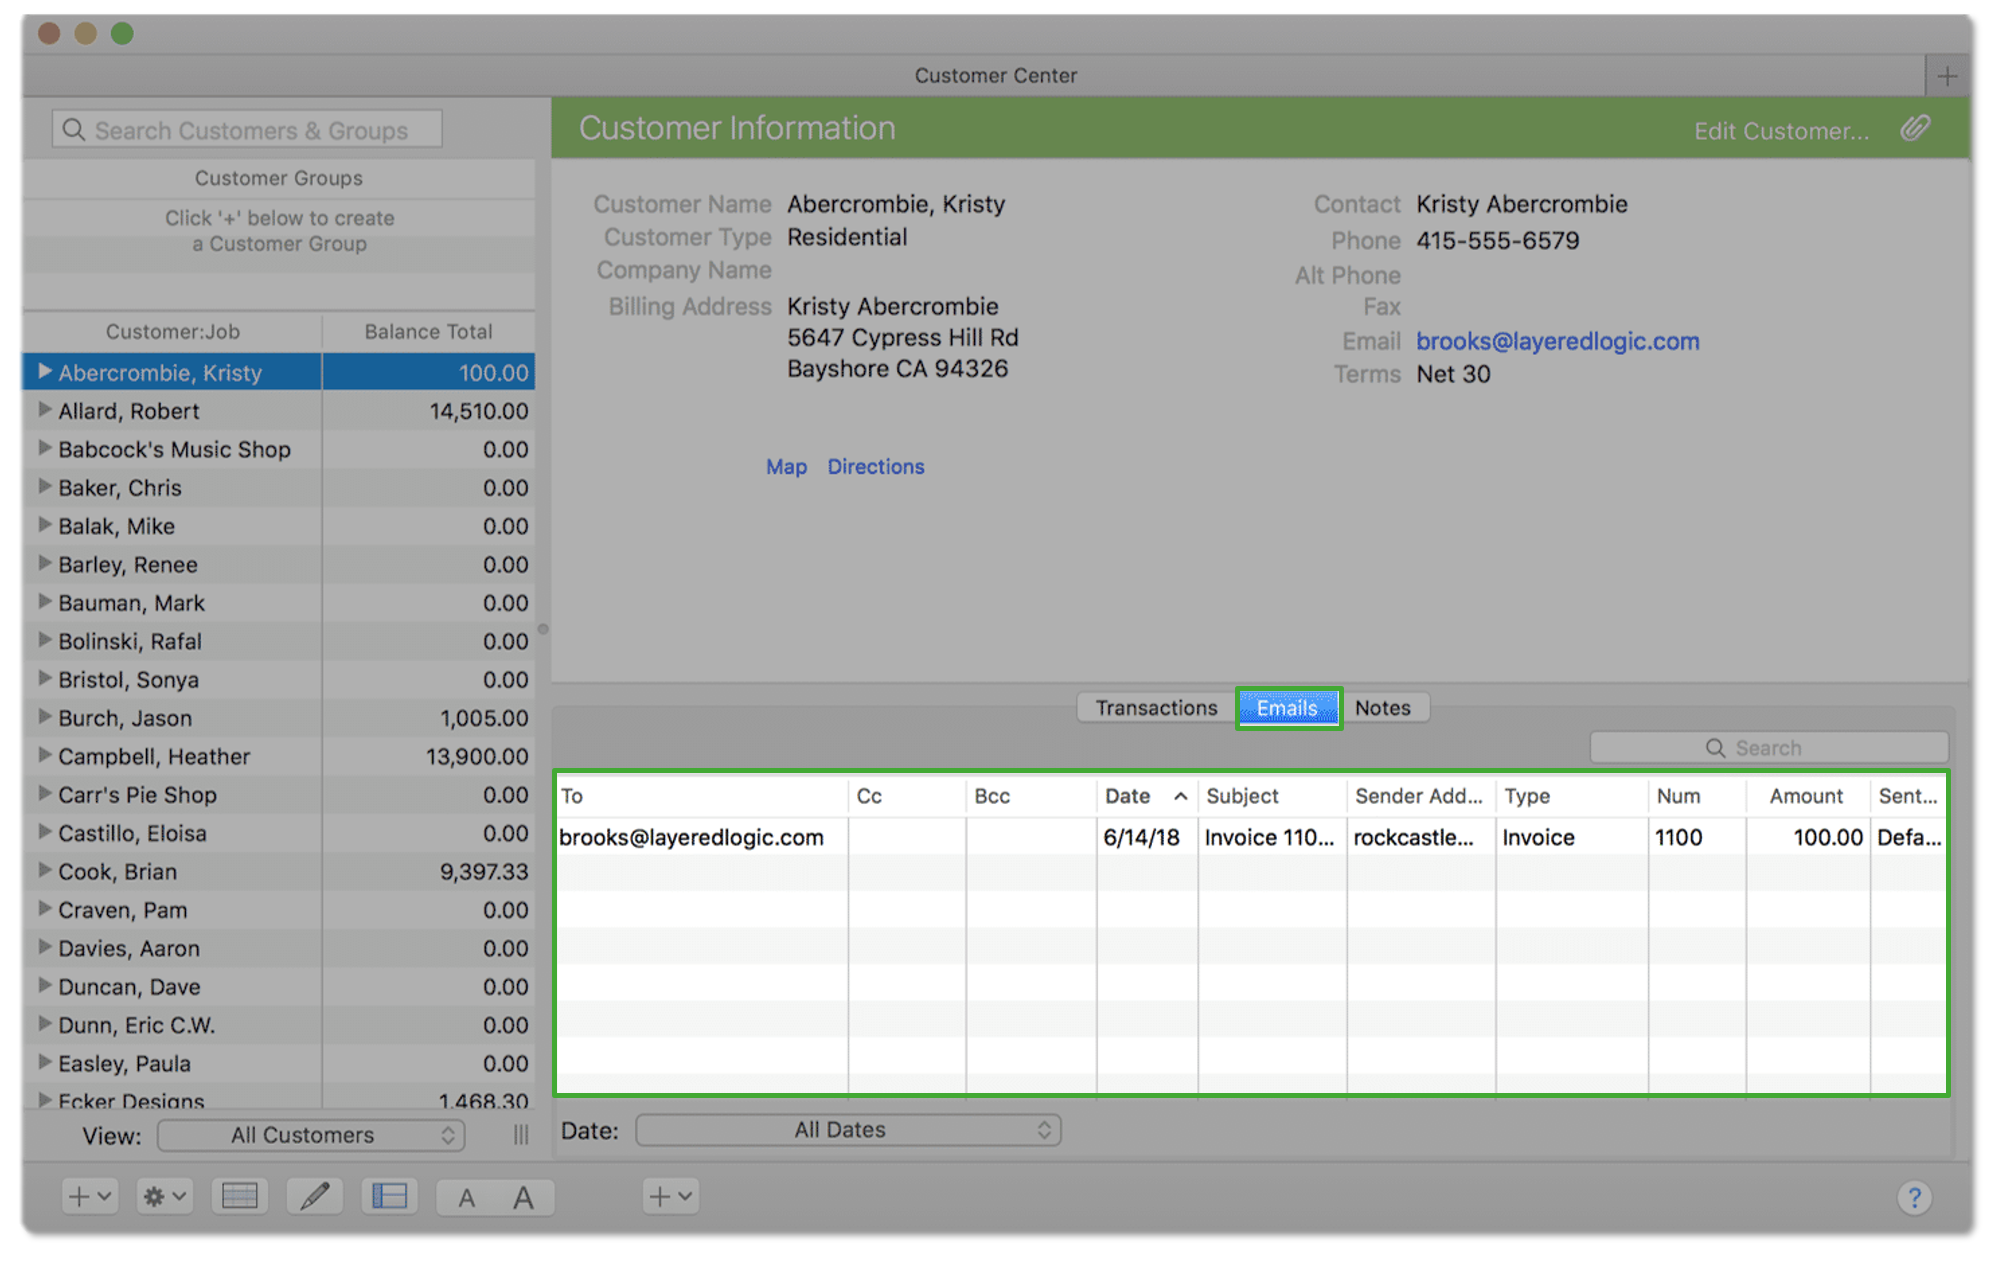 quickbooks for mac payments